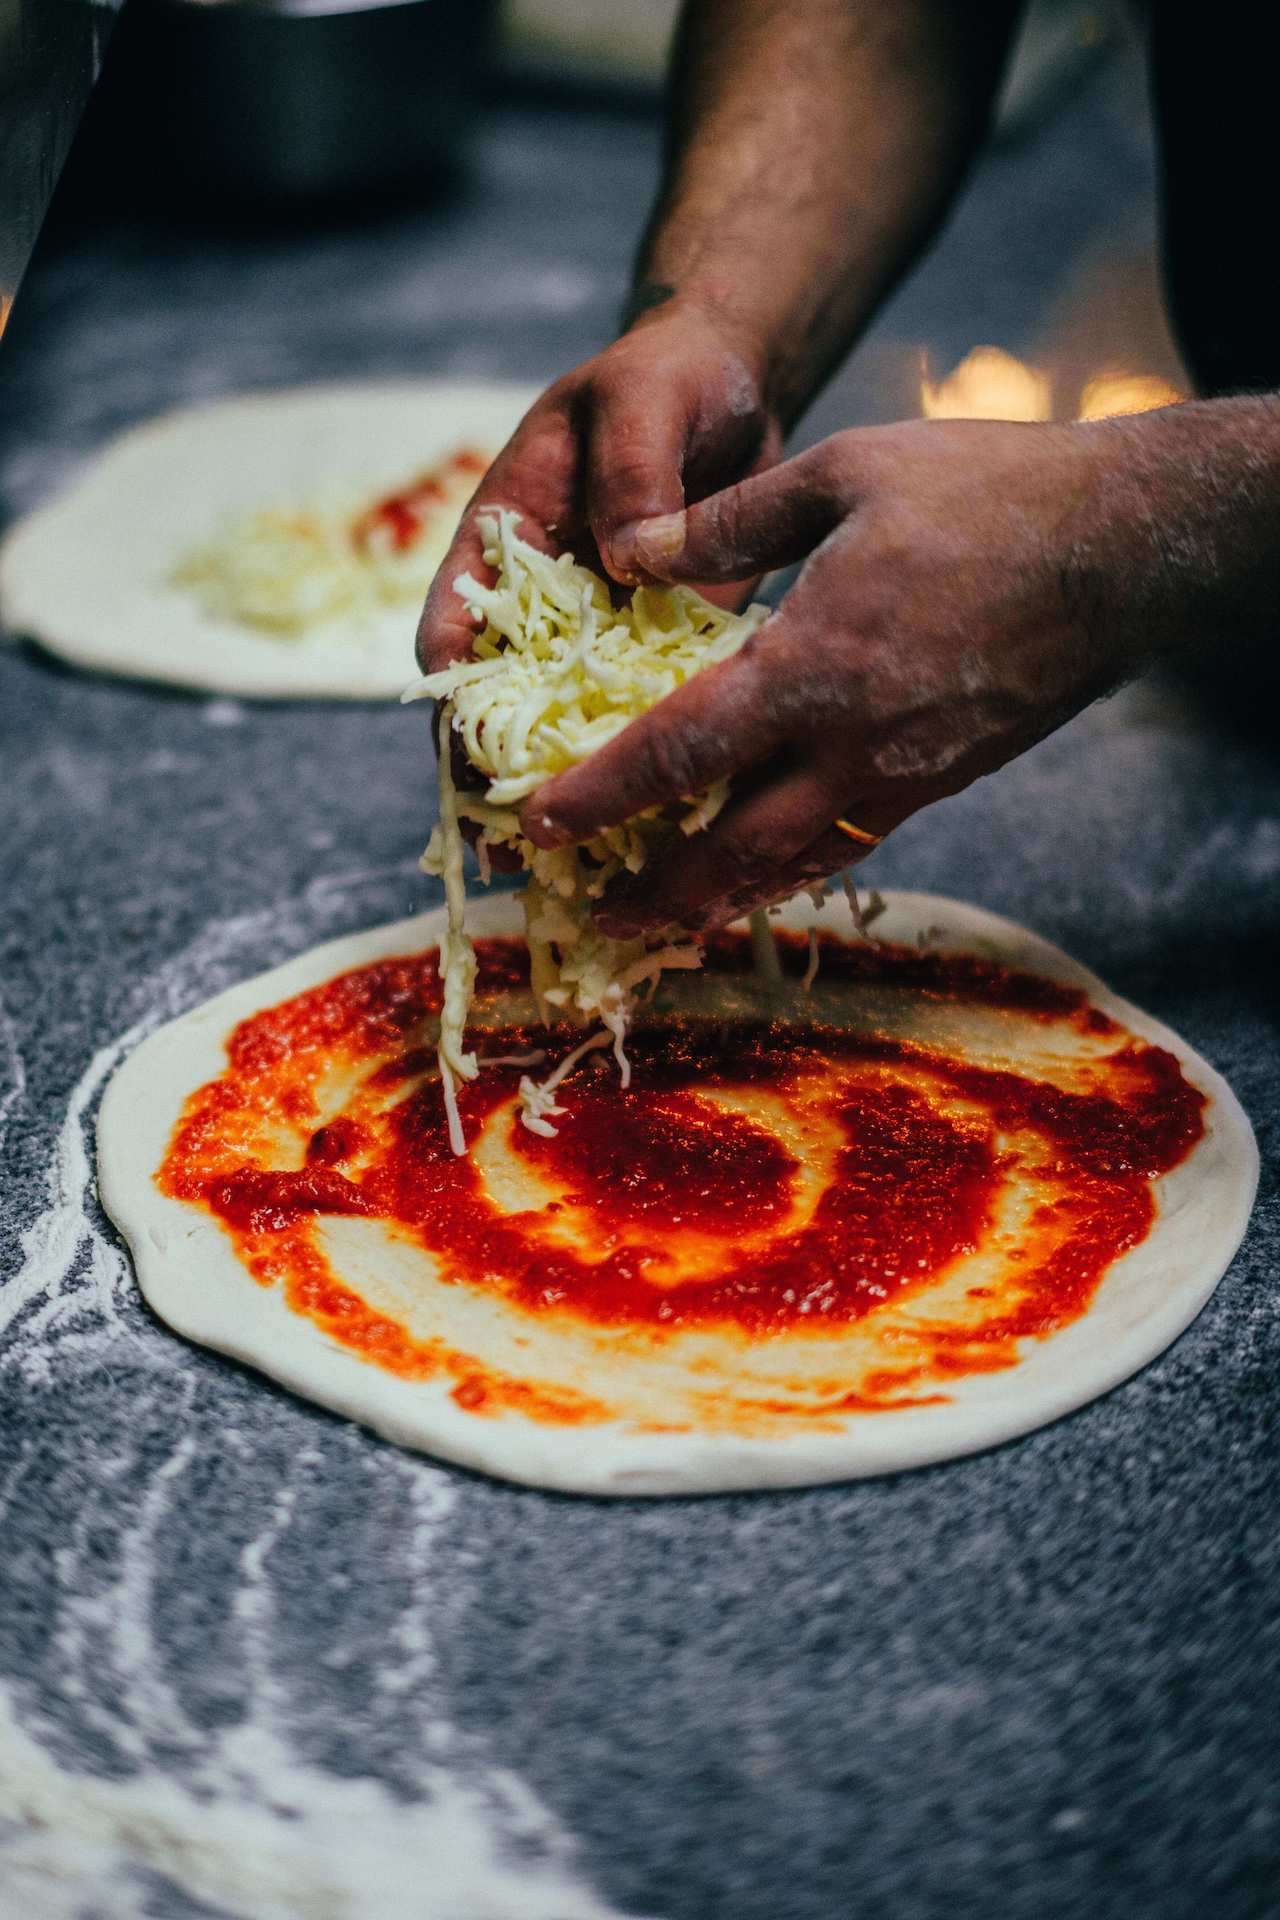 a view of hands spreading cheese on pizza dough covered with tomato sauce